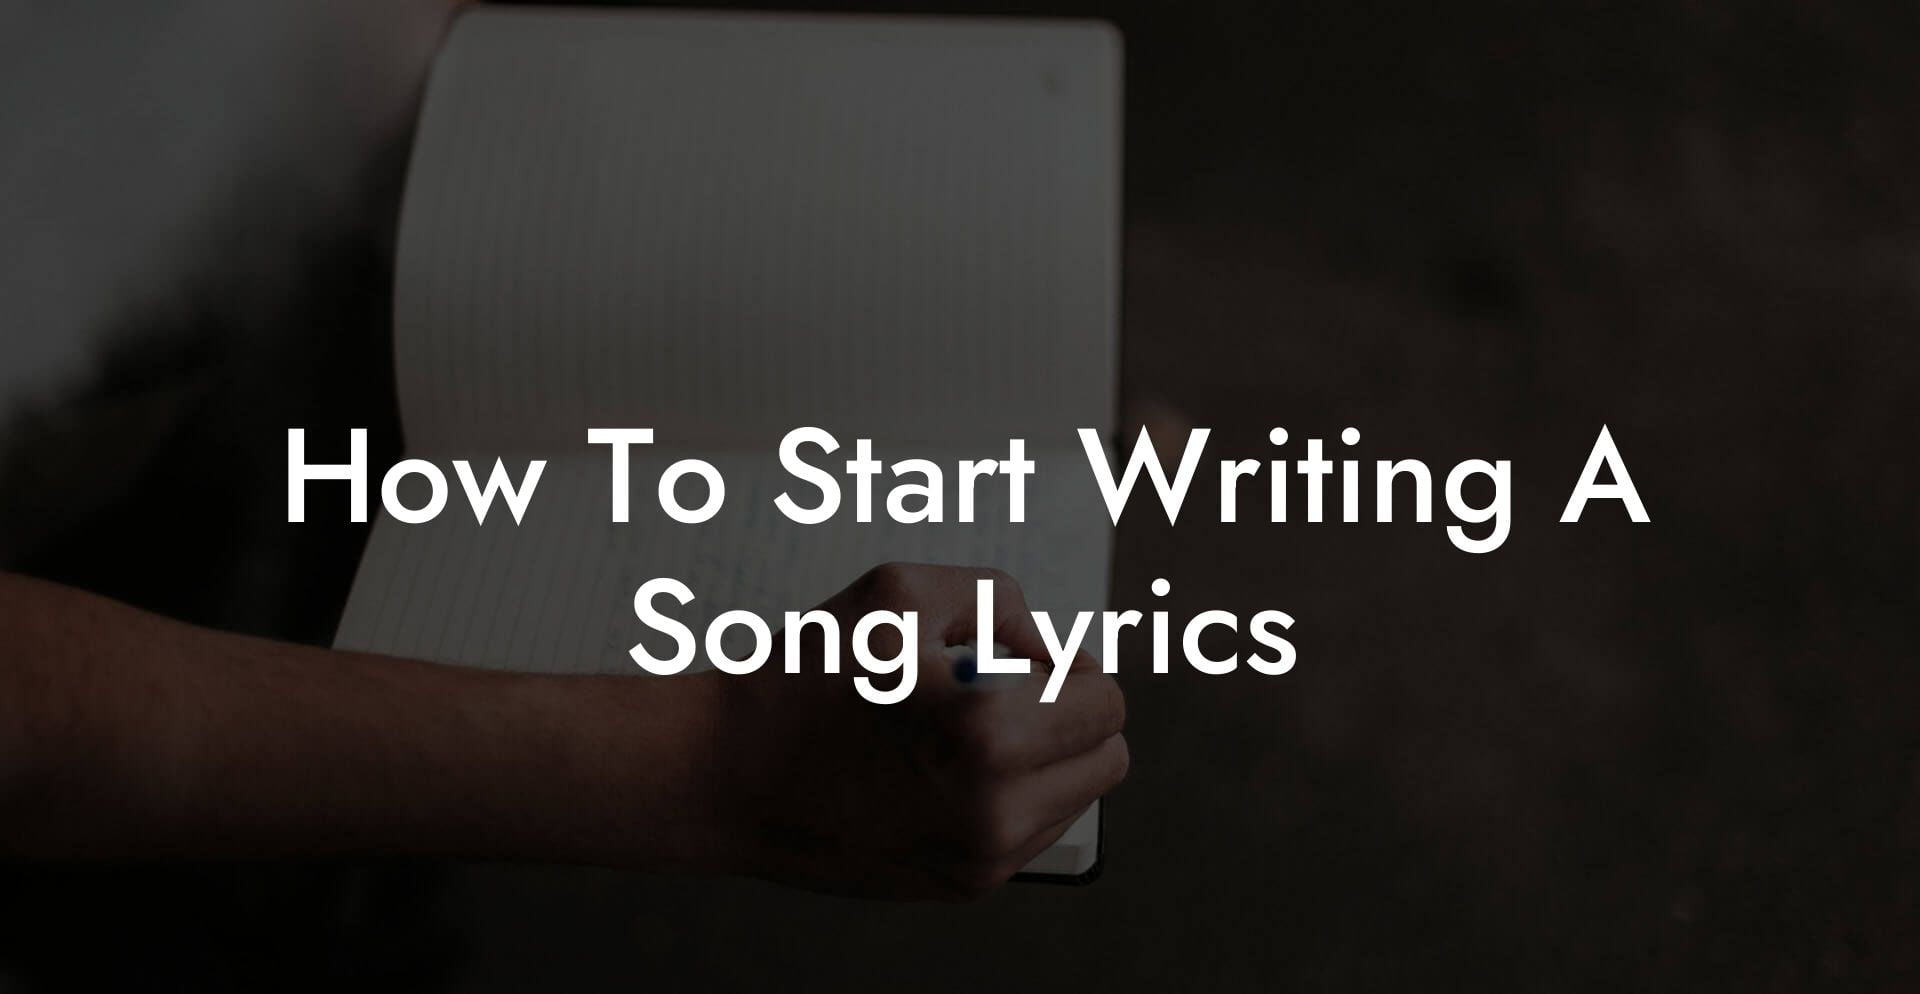 how to start writing a song lyrics lyric assistant